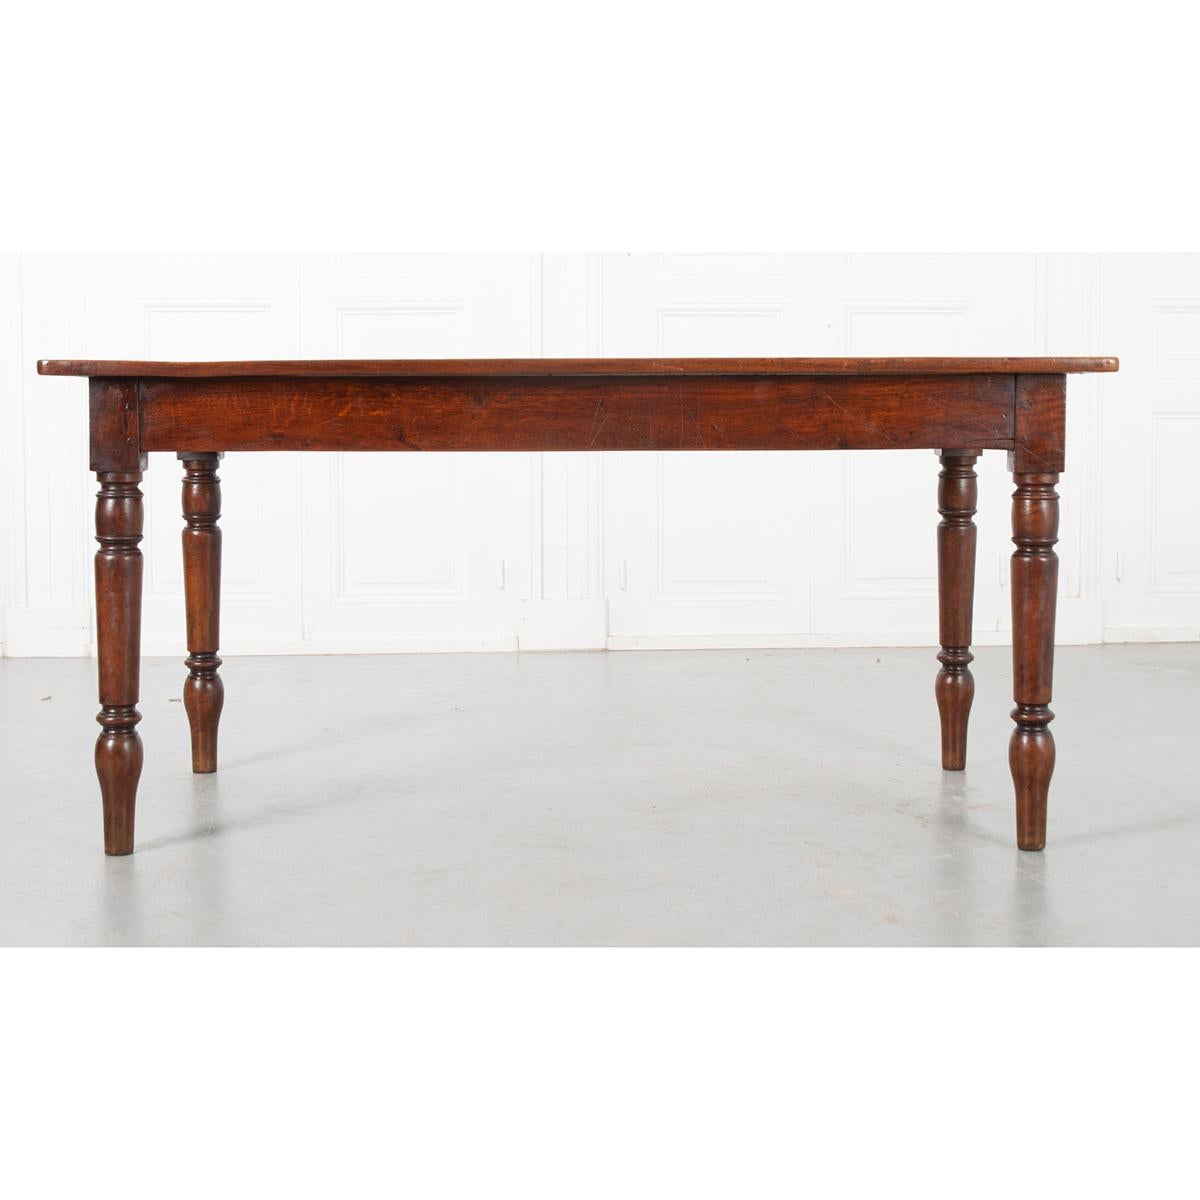 This is a French 19th century farm table made with walnut and oak. The top has a beautiful patina and sits over a plain apron which rests on turned legs. The piece has been cleaned and polished with a French paste wax. Circa 1870.
 